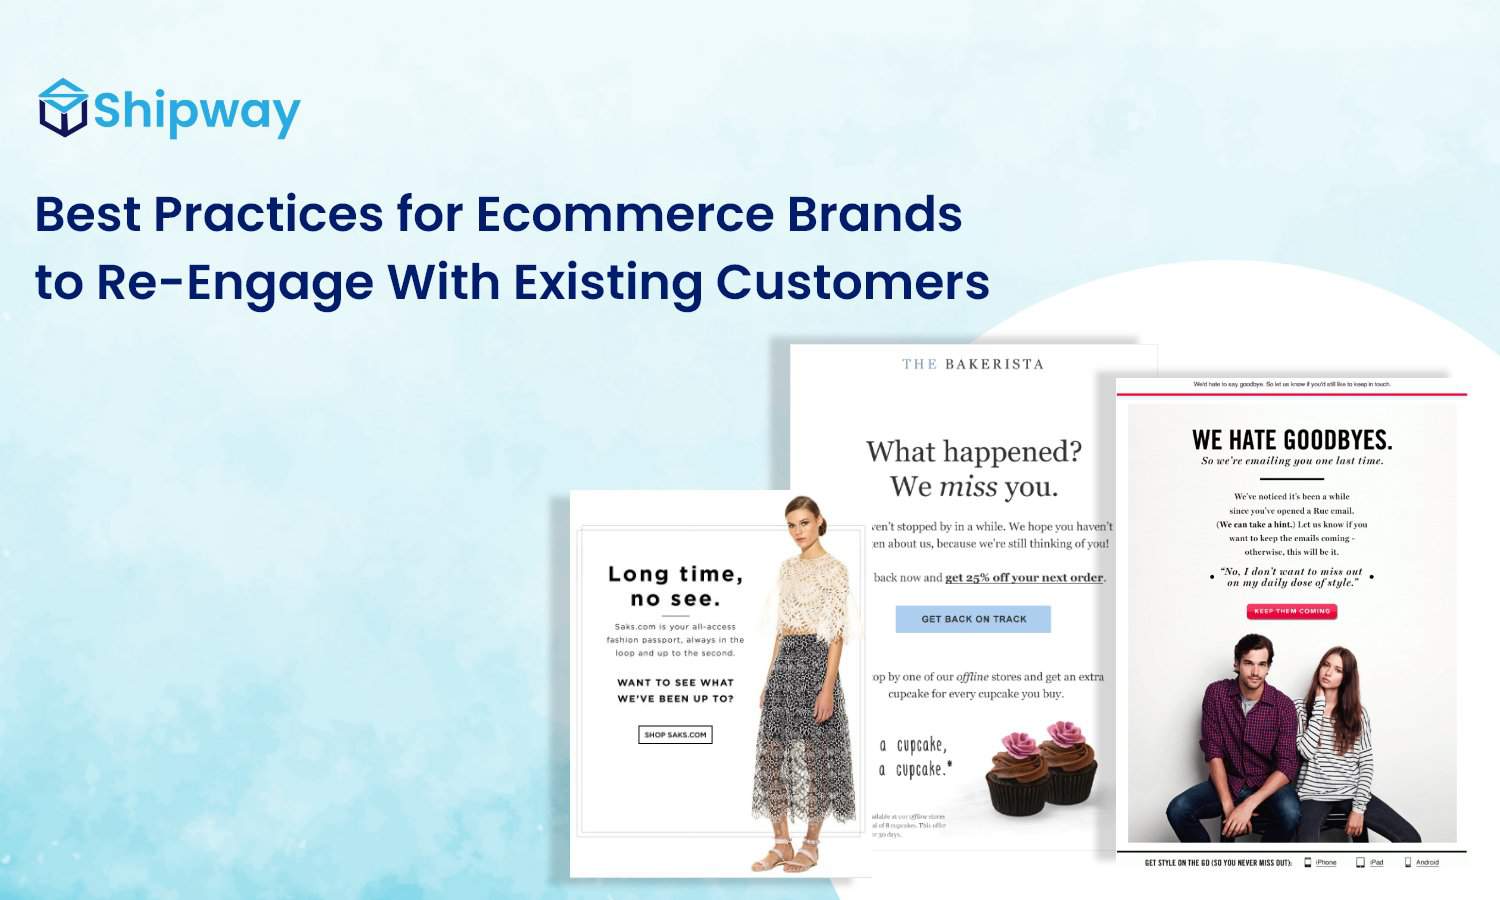 Best Practices for Ecommerce Brands to Re-Engage With Existing Customers